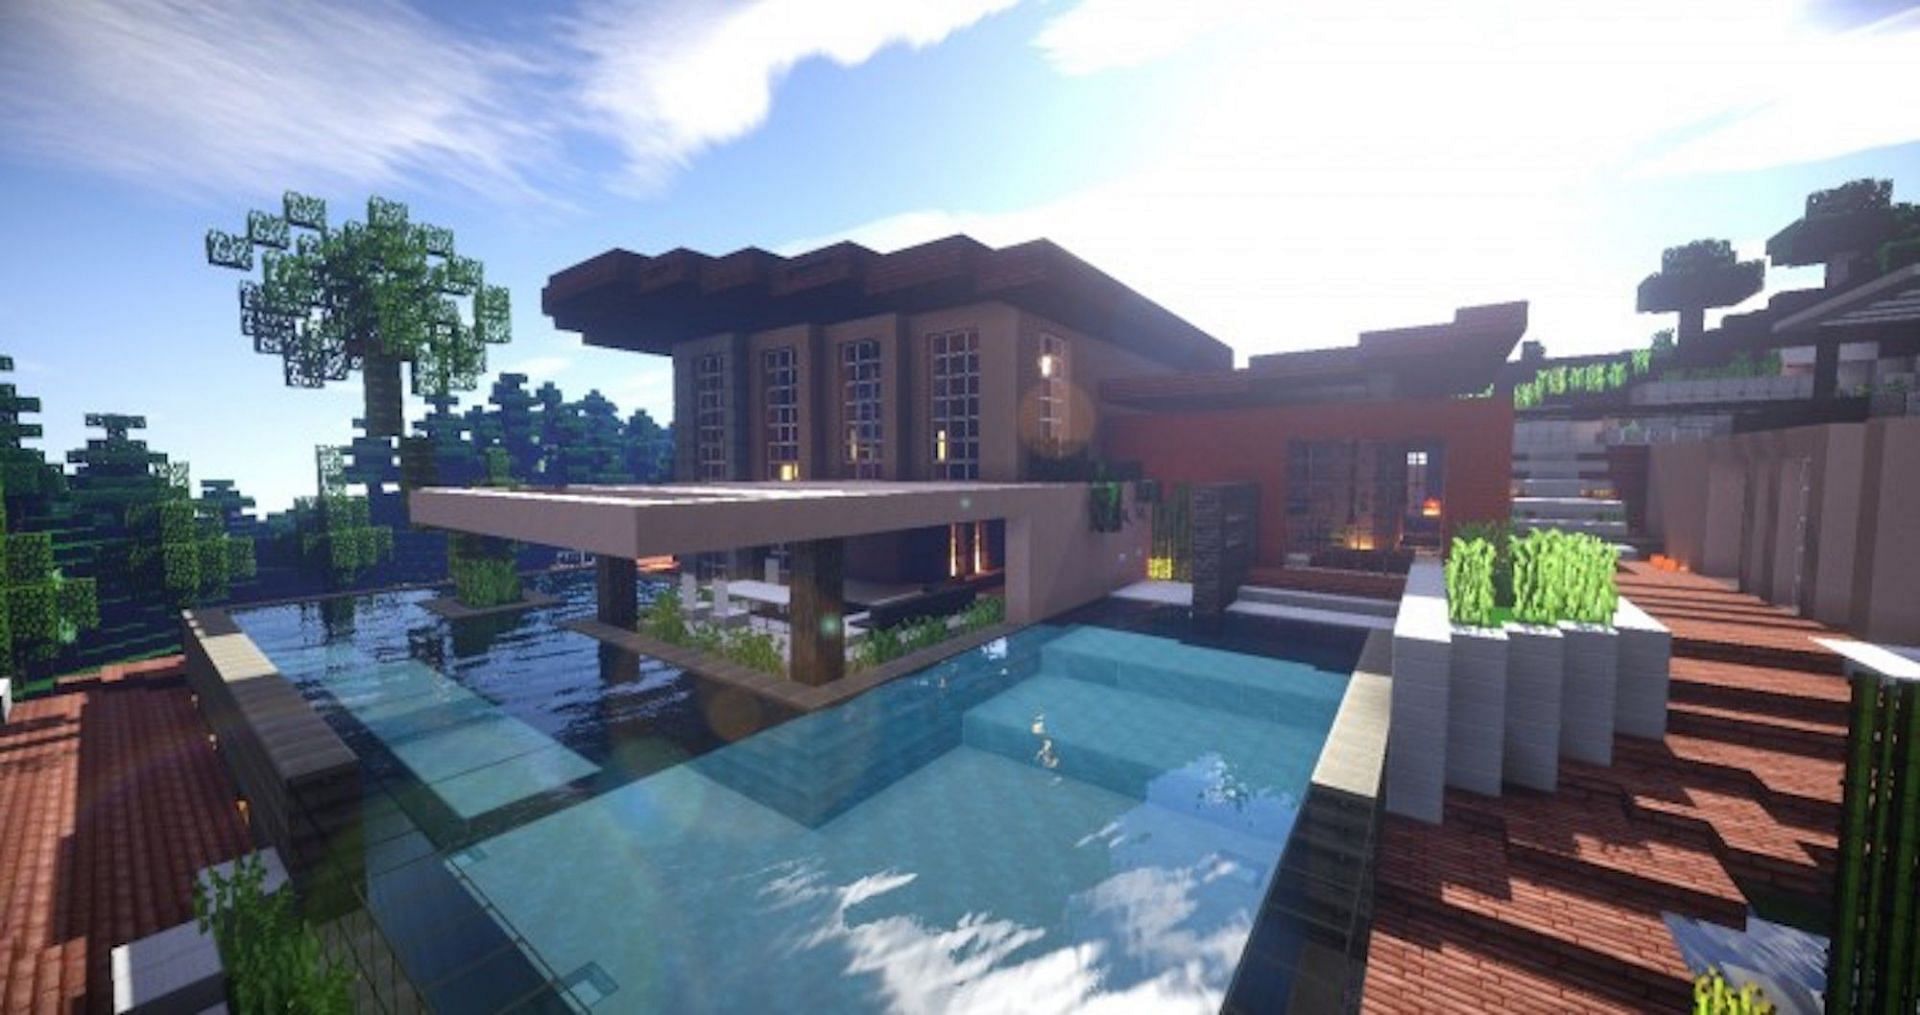 Moderna HD gives a realistic and cleaner look (Image via resourcepack.net)